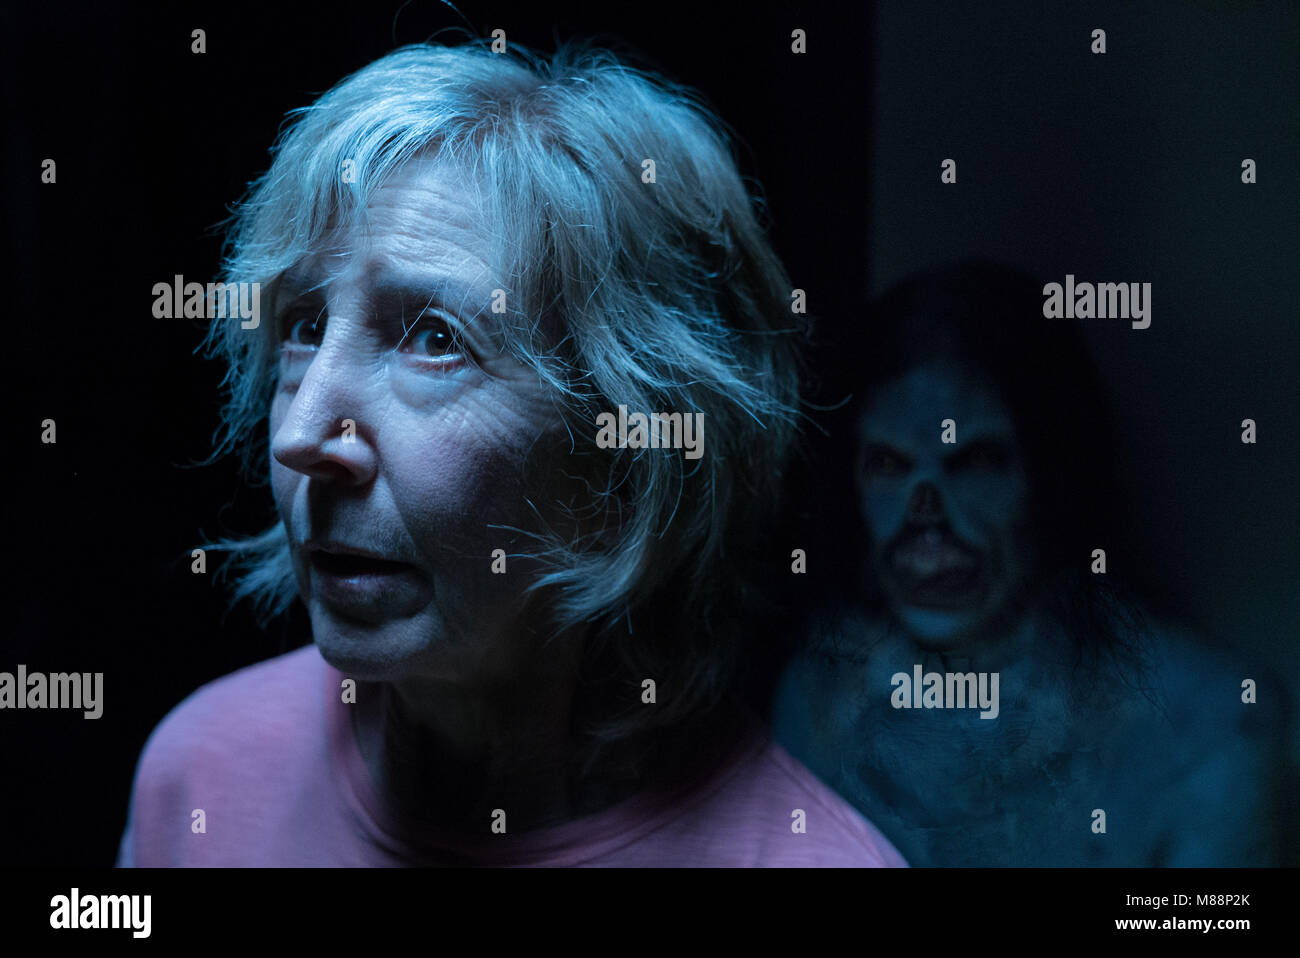 RELEASE DATE: January 5, 2018 TITLE: Insidious: The Last Key STUDIO: Universal Pictures DIRECTOR: Adam Robitel PLOT: Parapsychologist Dr. Elise Rainier faces her most fearsome and personal haunting yet, in her own family home. STARRING: LIN SHAYE as Dr. Elise Rainier. (Credit Image: © Universal Pictures/Entertainment Pictures) Stock Photo